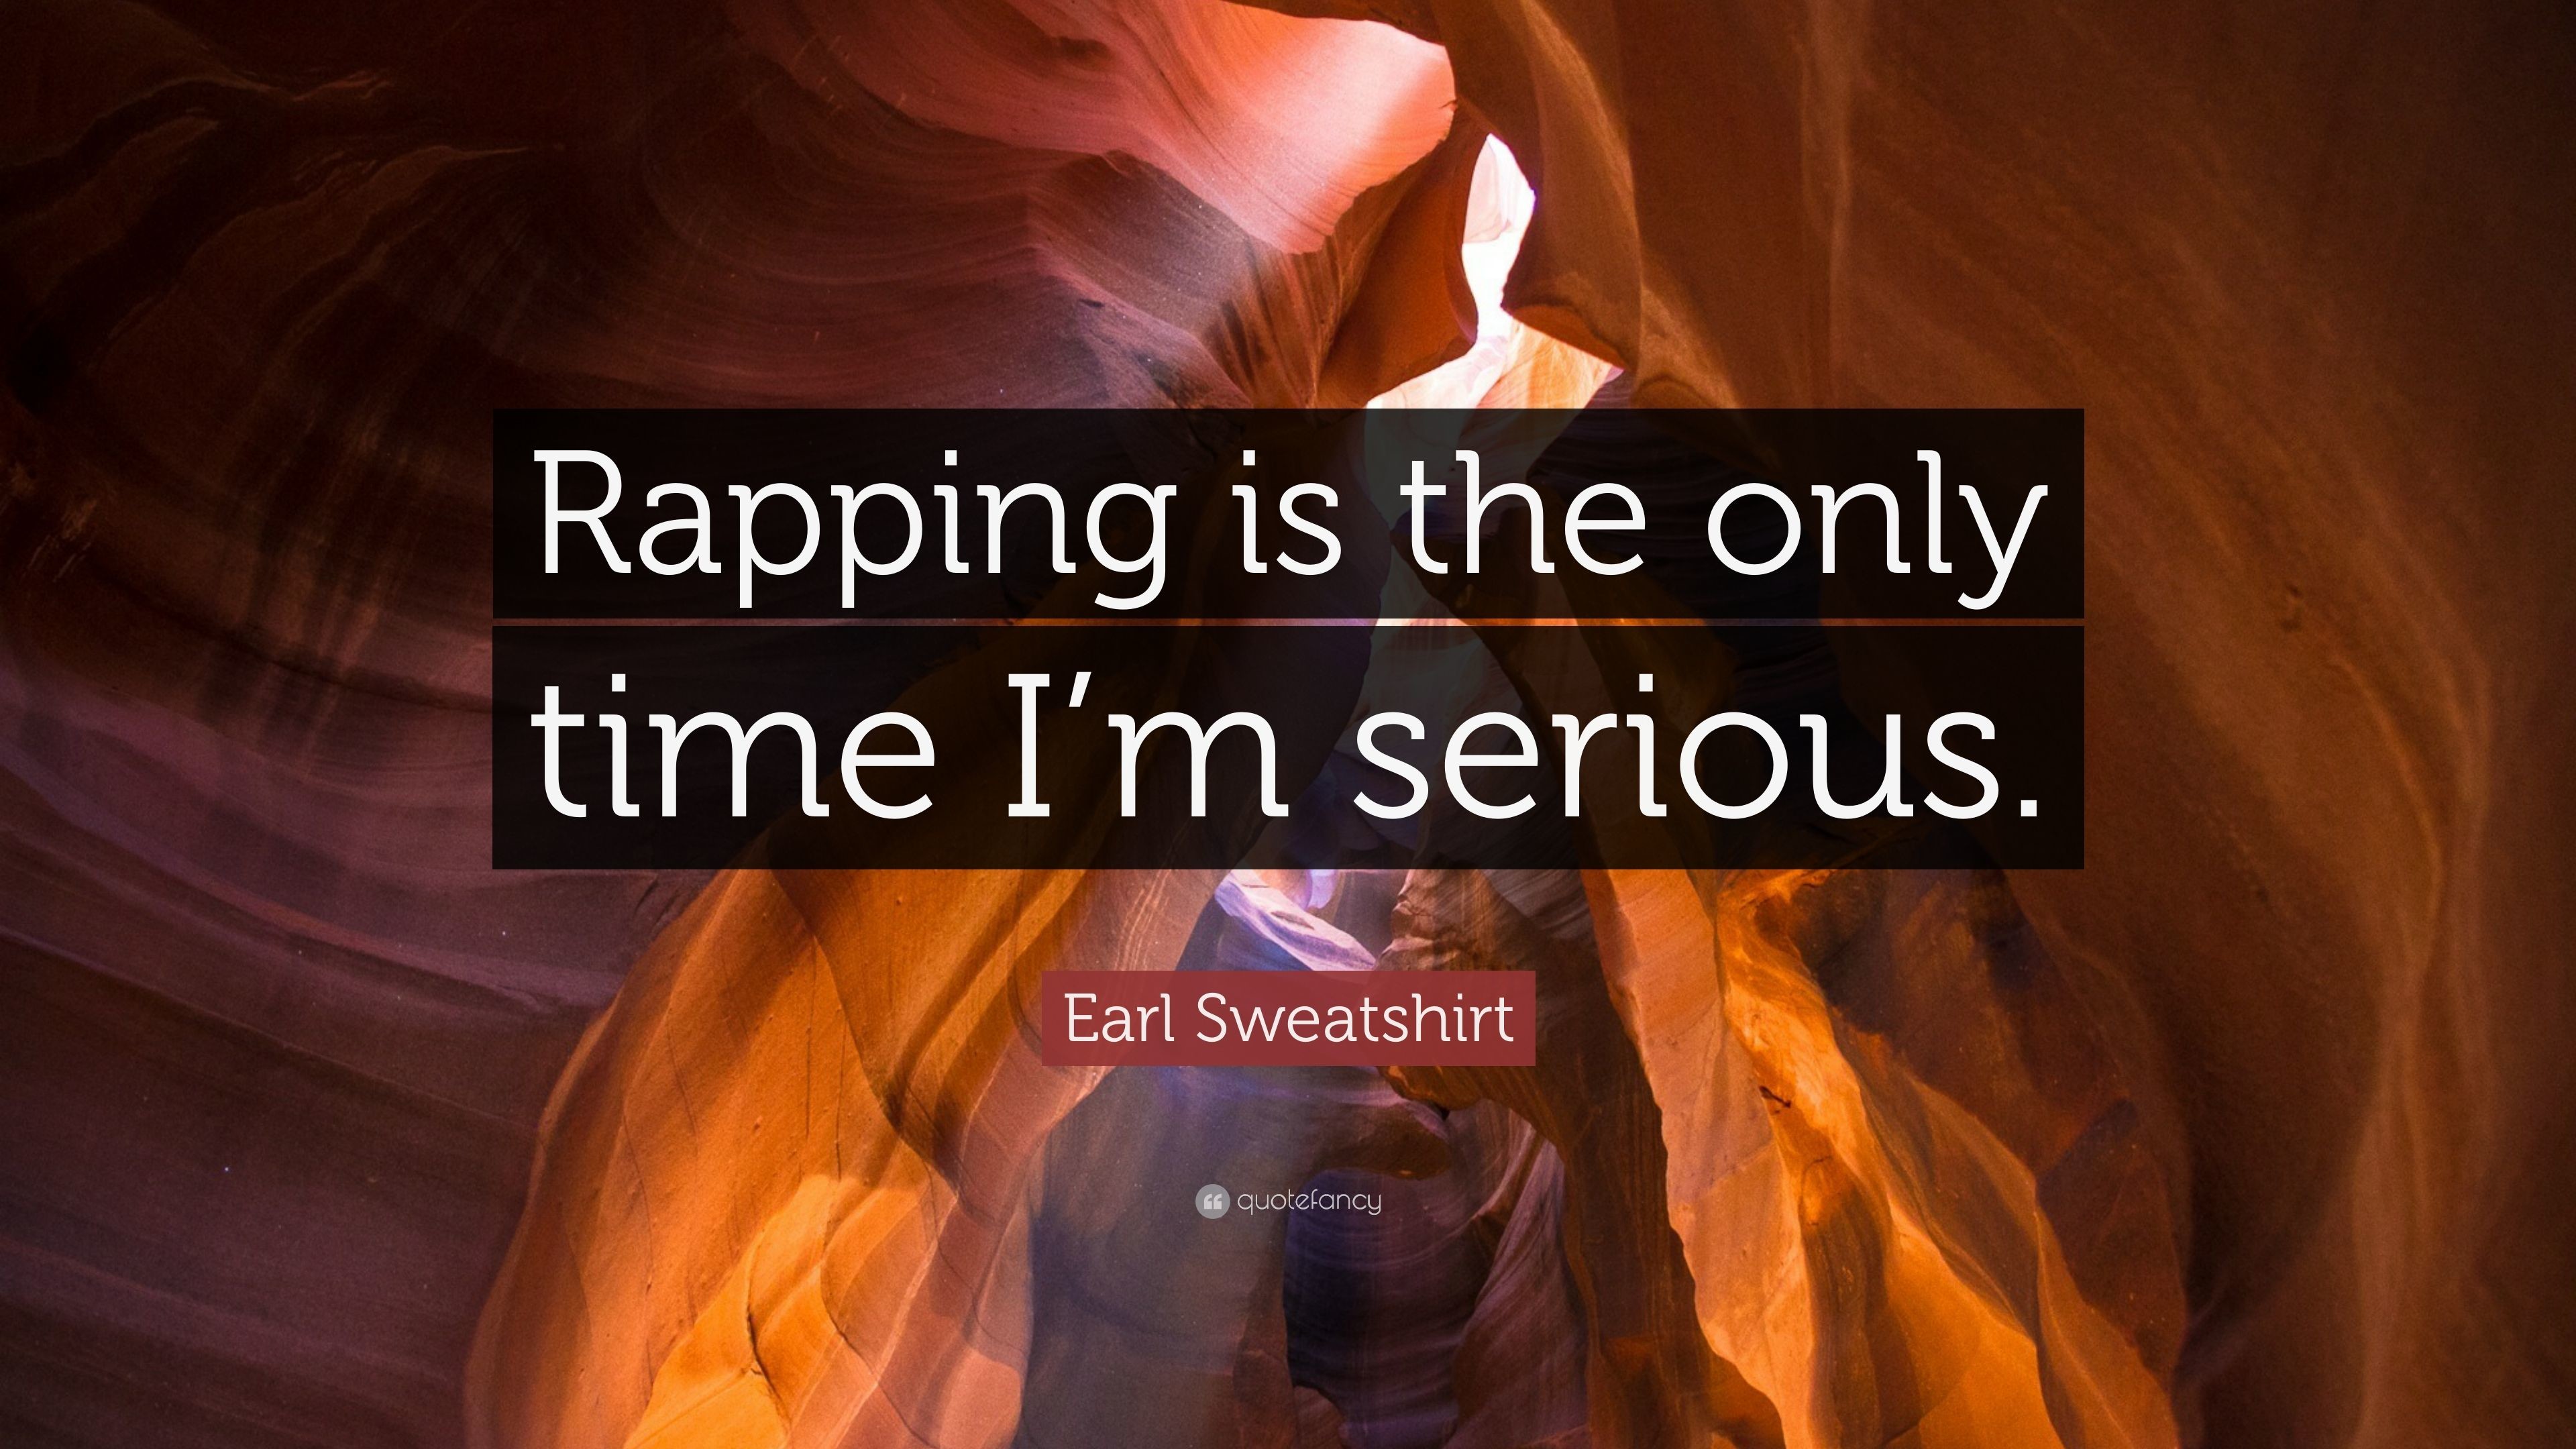 3840x2160 Earl Sweatshirt Quote: “Rapping is the only time I'm serious.”